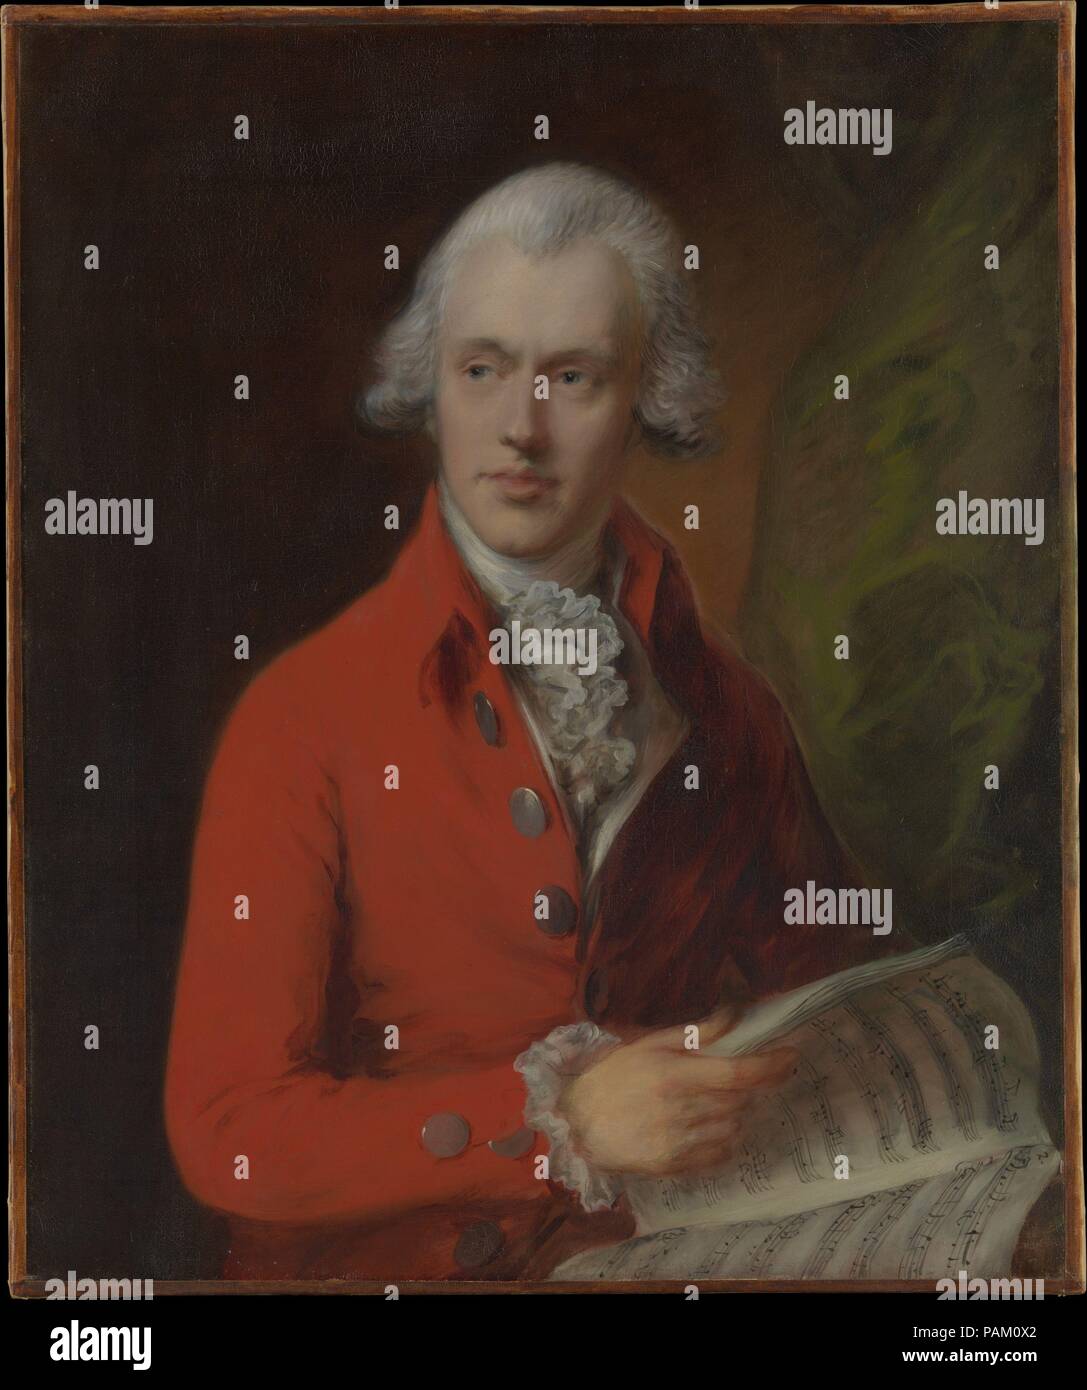 Charles Rousseau Burney (1747-1819). Artist: Thomas Gainsborough (British, Sudbury 1727-1788 London). Dimensions: 30 1/4 x 25 1/8 in. (76.8 x 63.8 cm). Date: ca. 1780.  The sitter was a nephew and pupil of the celebrated musicologist Dr. Charles Burney. In 1770 he married Dr. Burney's oldest daughter, Esther, called Hetty, whom he had known since childhood. C. R. Burney was a composer as well as a virtuoso musician. He and his wife are reported to have played brilliantly together on the harpsichord. Museum: Metropolitan Museum of Art, New York, USA. Stock Photo